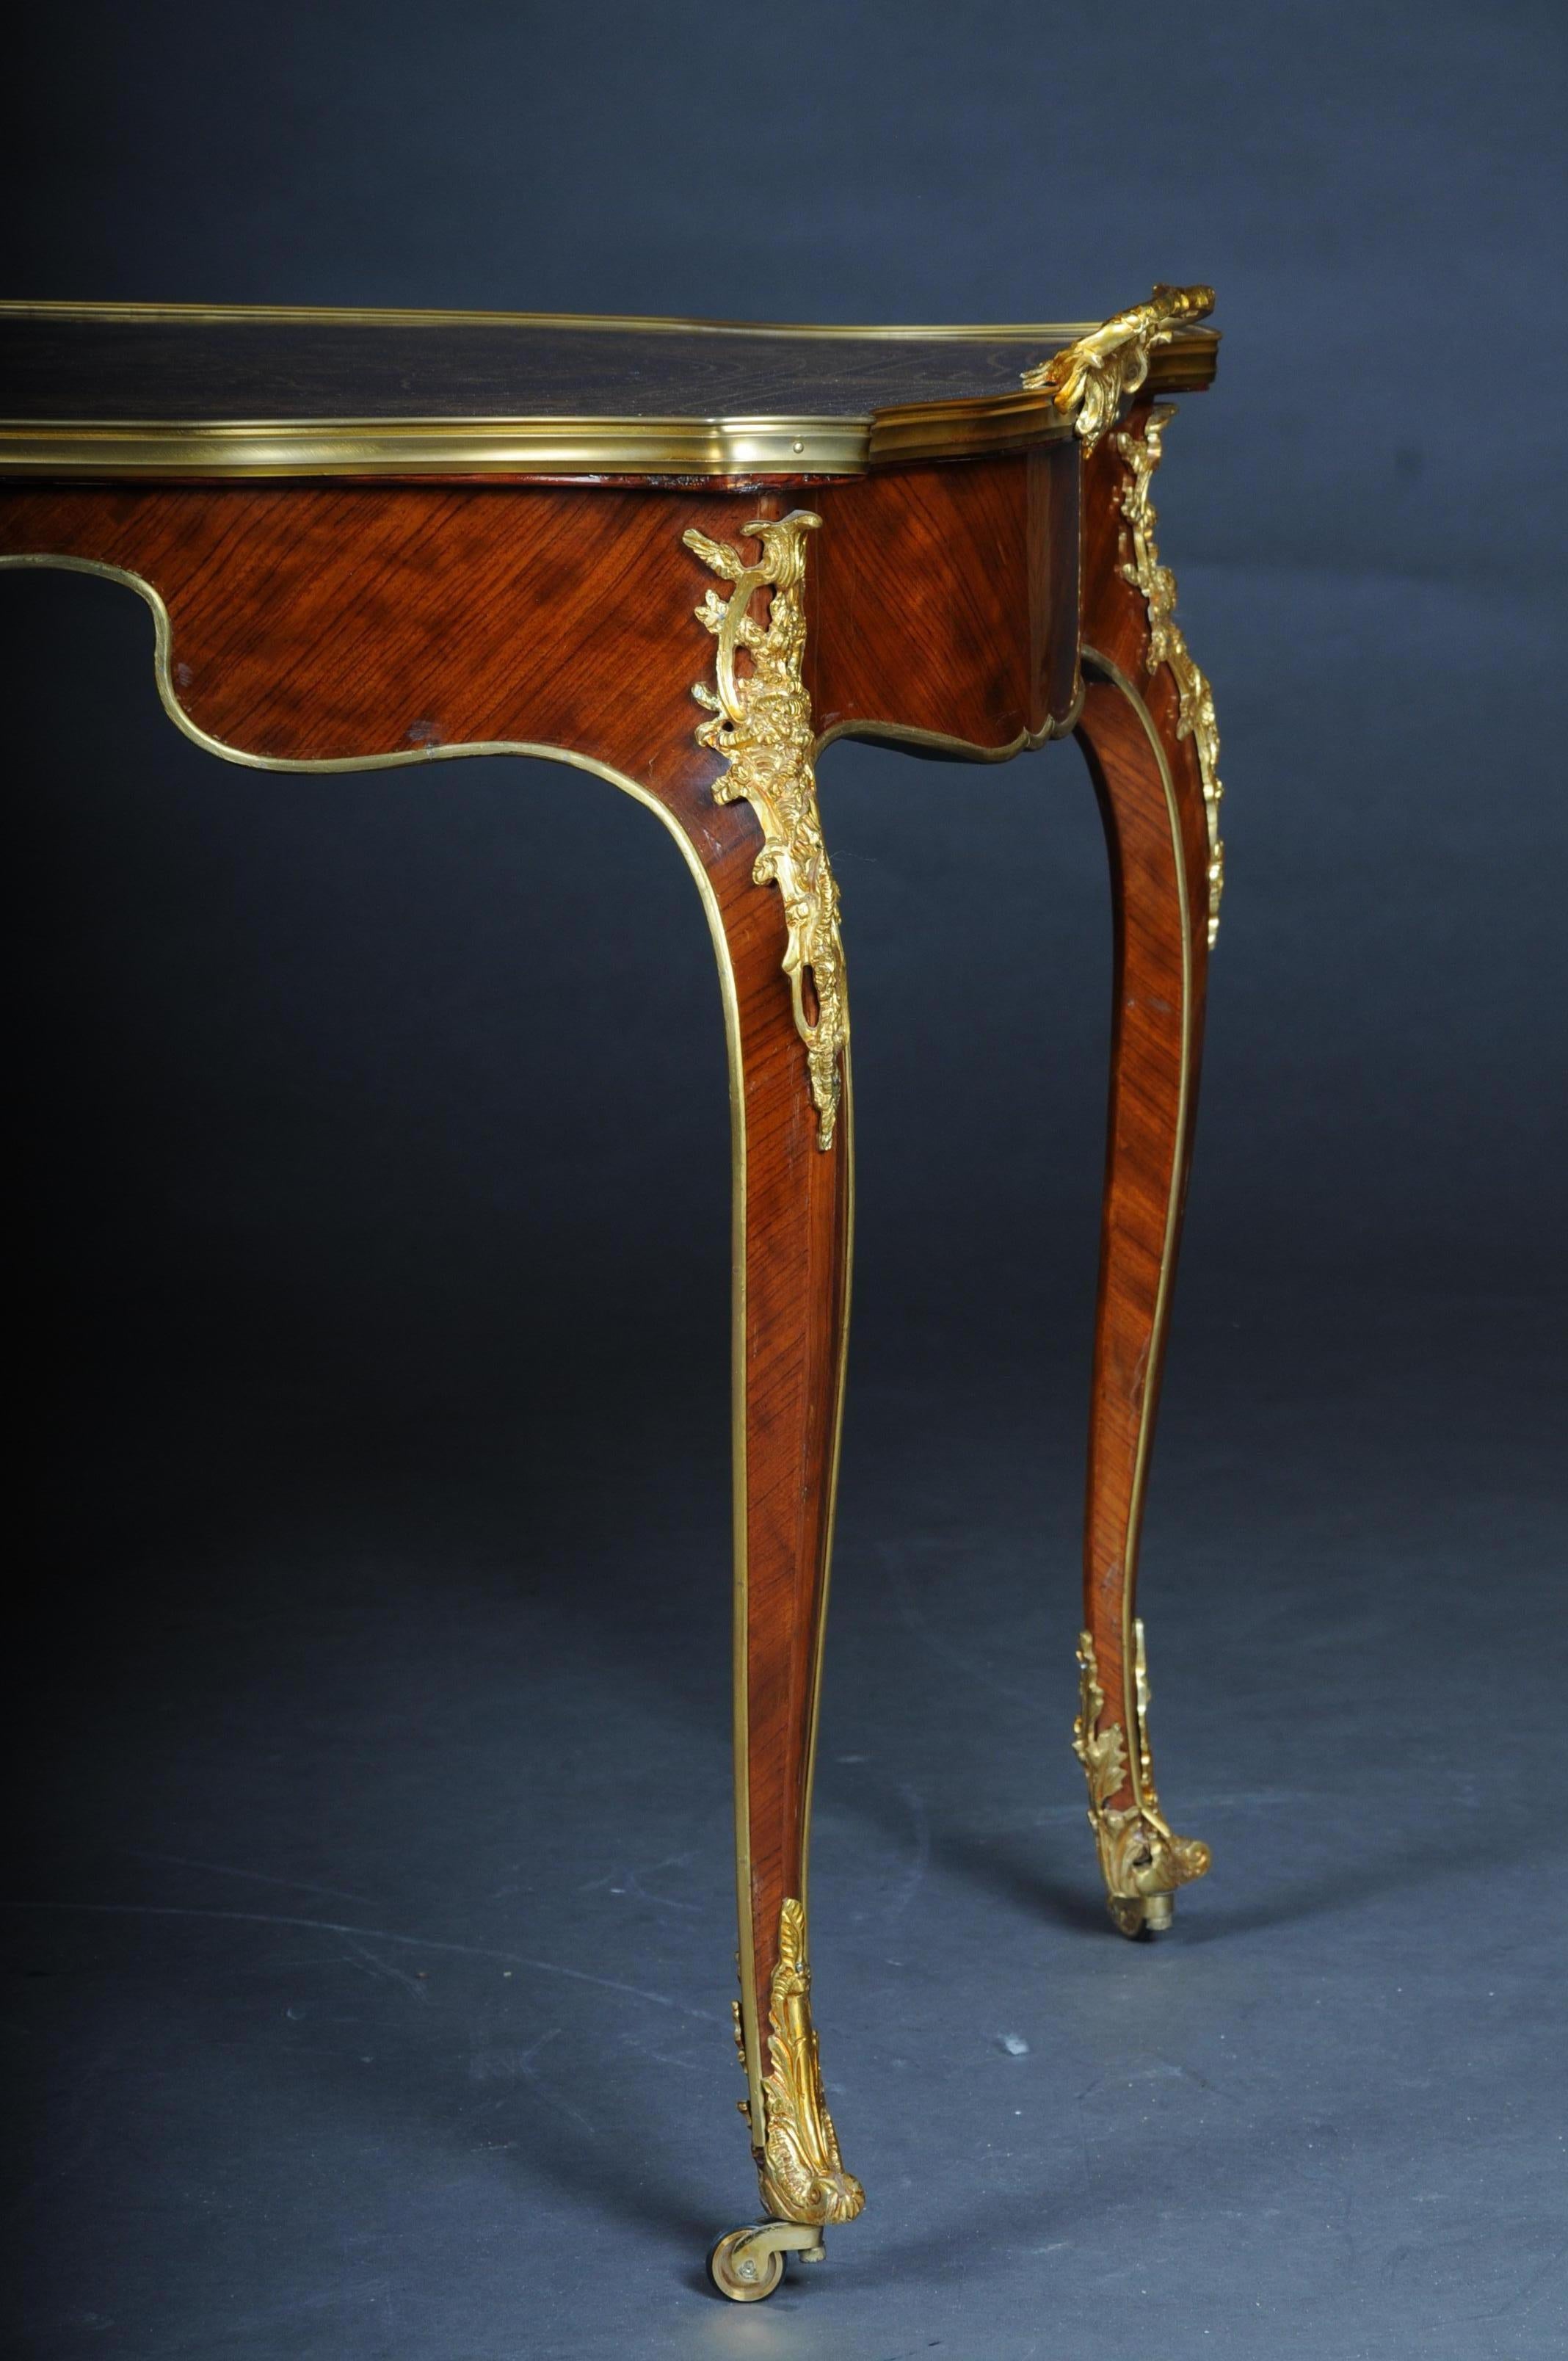 Elegant French Salon Table in Louis Quinze Style 6